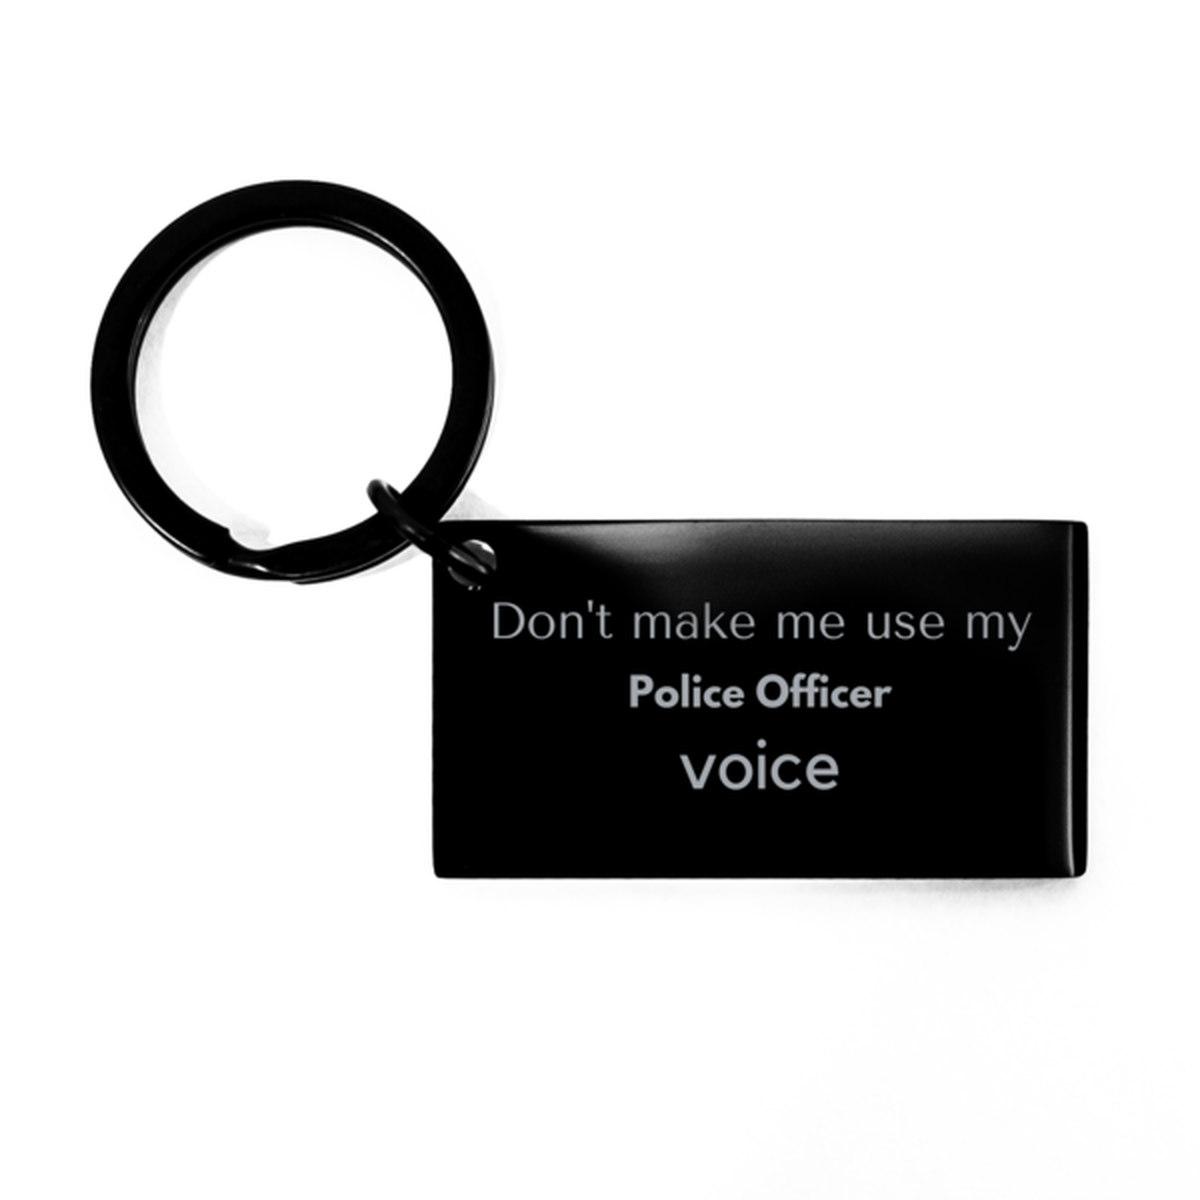 Don't make me use my Police Officer voice, Sarcasm Police Officer Gifts, Christmas Police Officer Keychain Birthday Unique Gifts For Police Officer Coworkers, Men, Women, Colleague, Friends